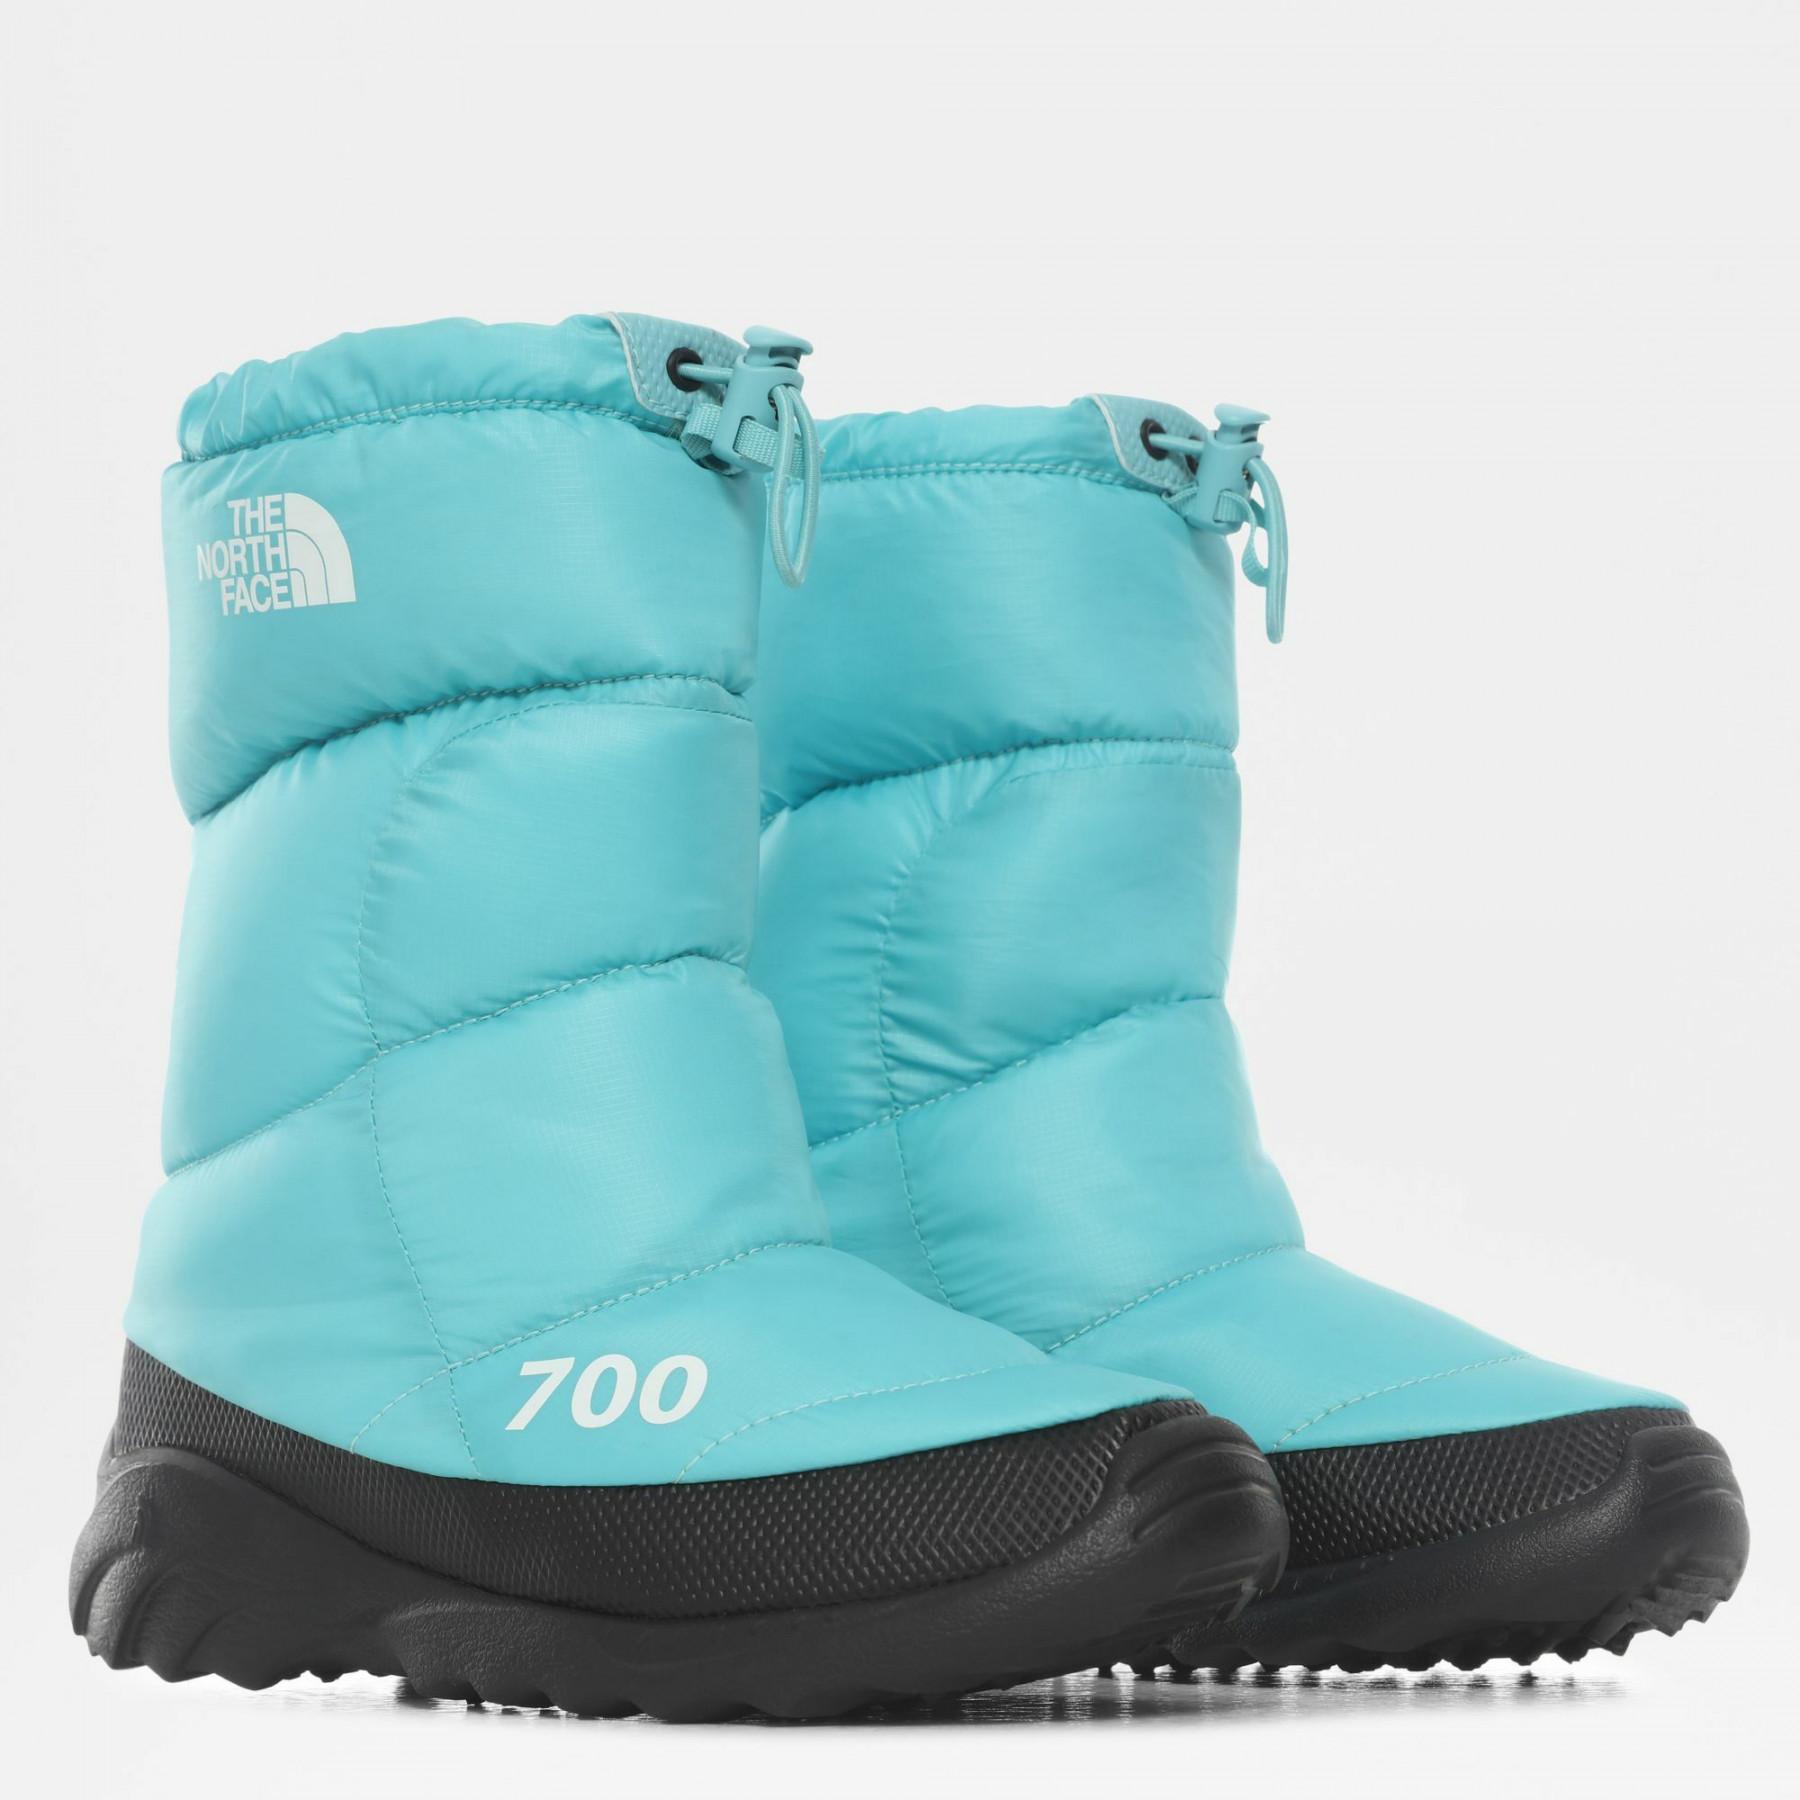 Baskets femme The North Face Nuptse Bootie 700